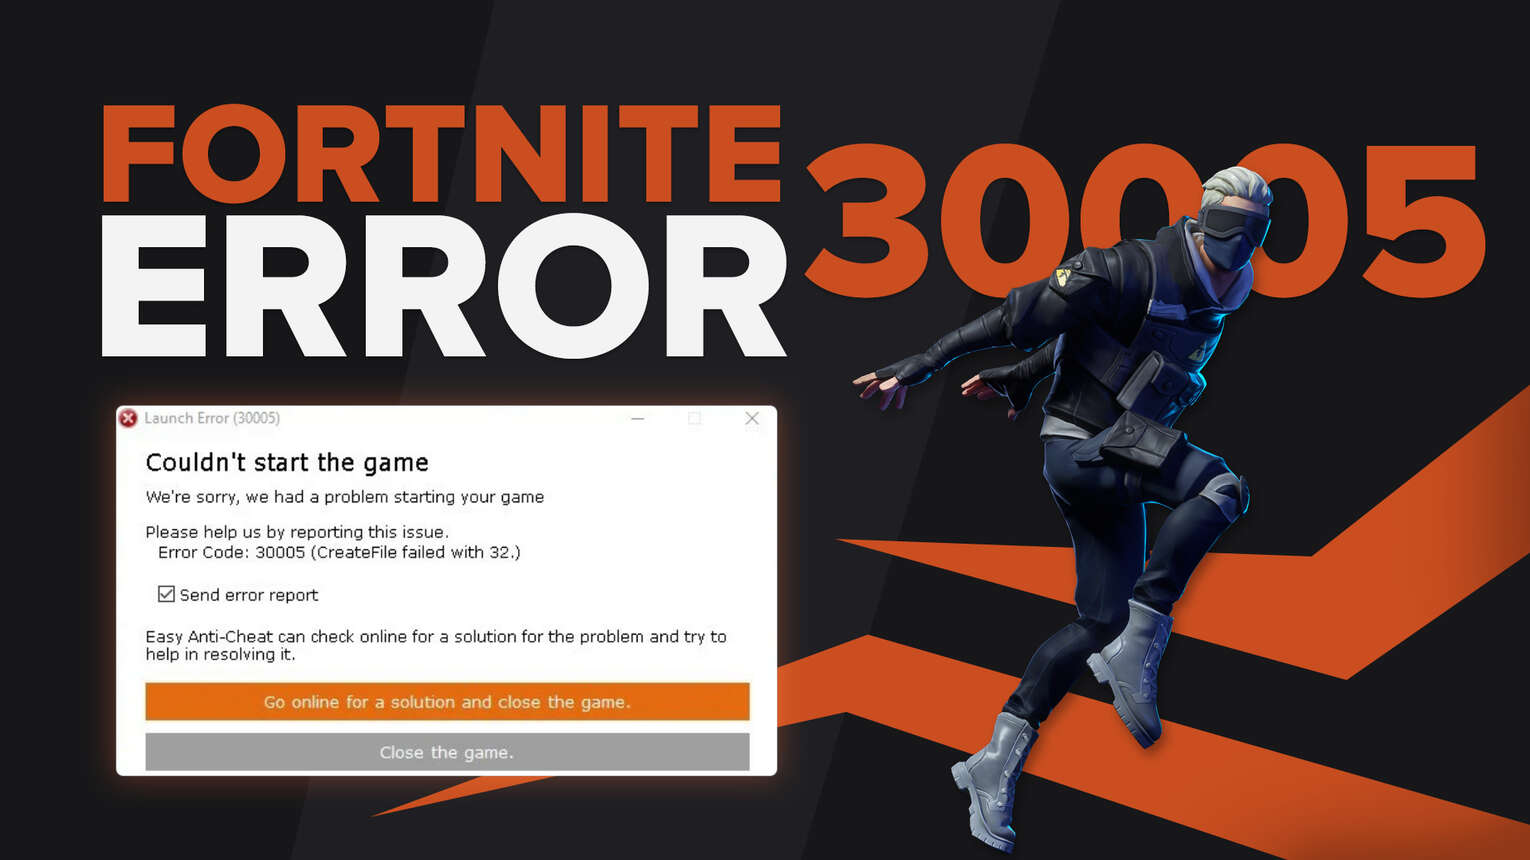 Fortnite Error code 6 - What is it and can you fix it?